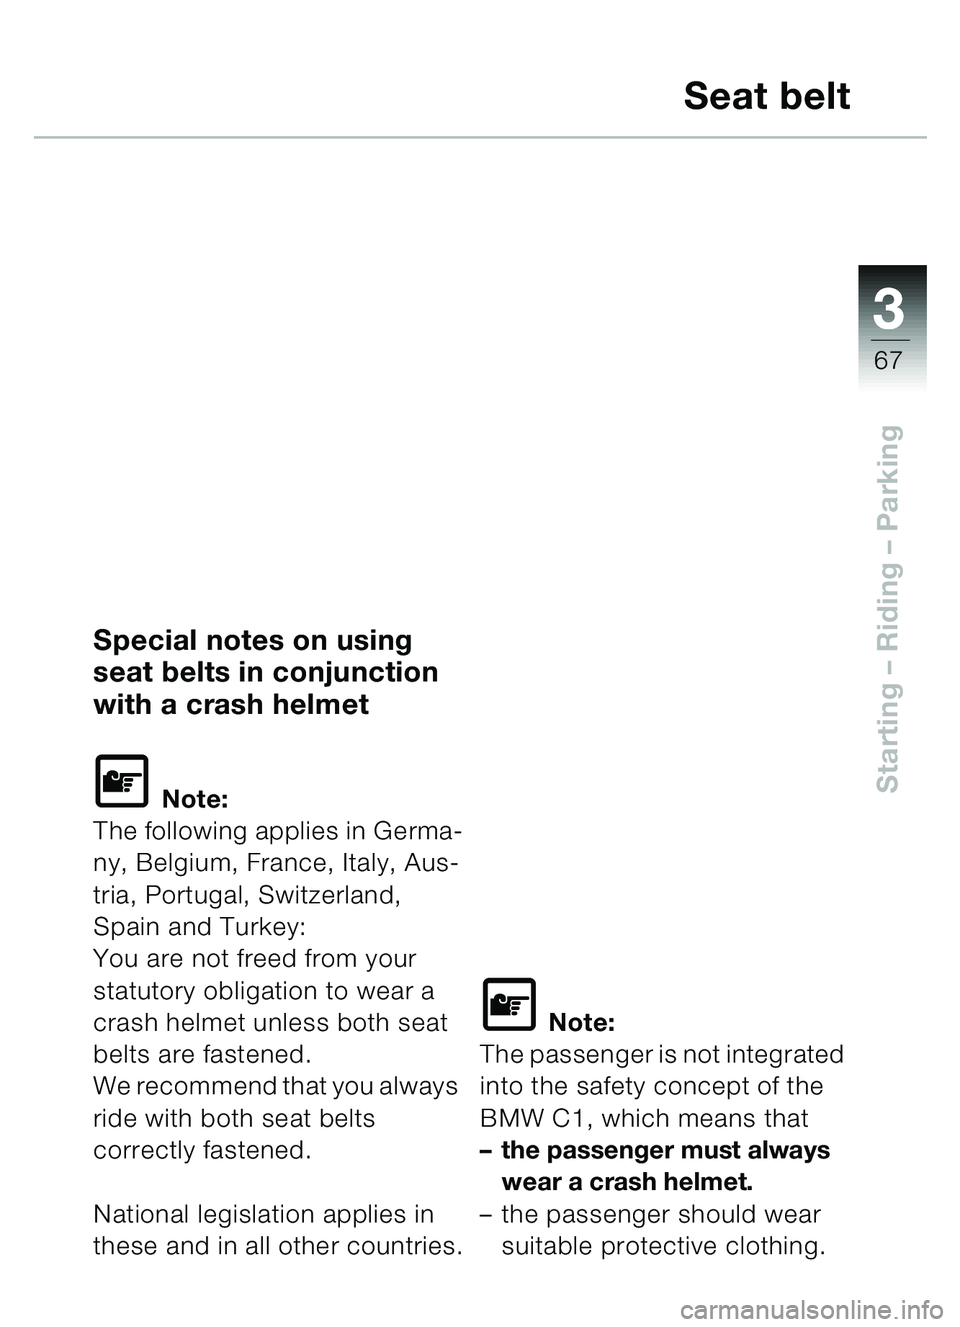 BMW MOTORRAD C1 2000  Riders Manual (in English) 33
67
Starting – Riding – Parking
Seat belt
Special notes on using 
seat belts in conjunction 
with a crash helmet
L Note:
The following applies in Germa-
ny, Belgium, France, Italy, Aus-
tria, Po